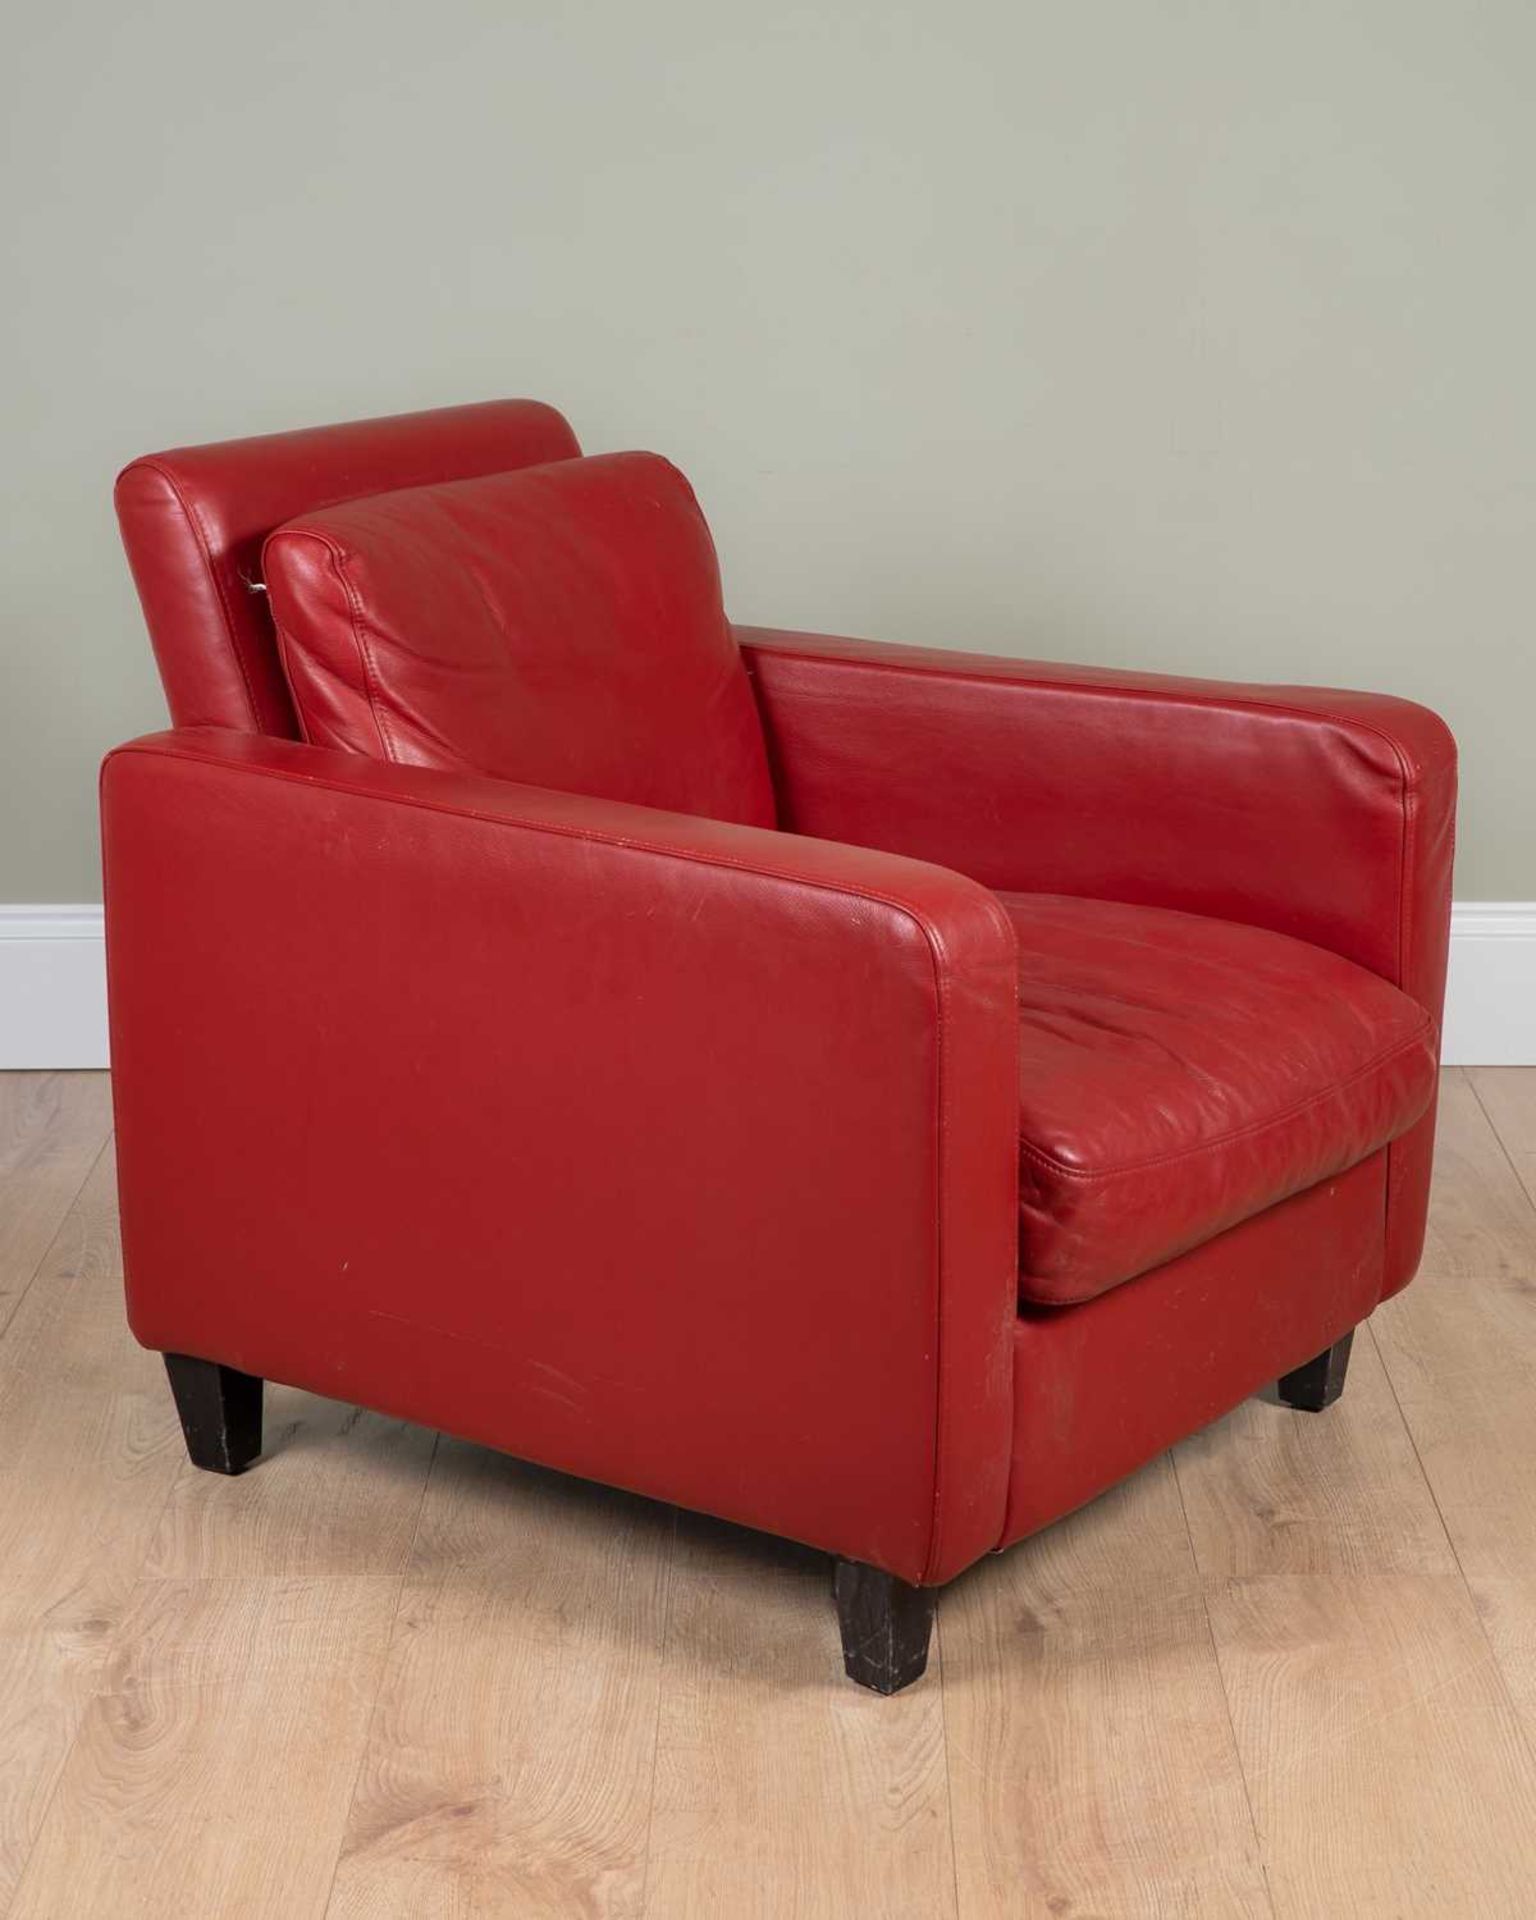 An Art Deco style red leather chair by Habitat, on ebonised square legs, Habitat label to the - Image 2 of 4